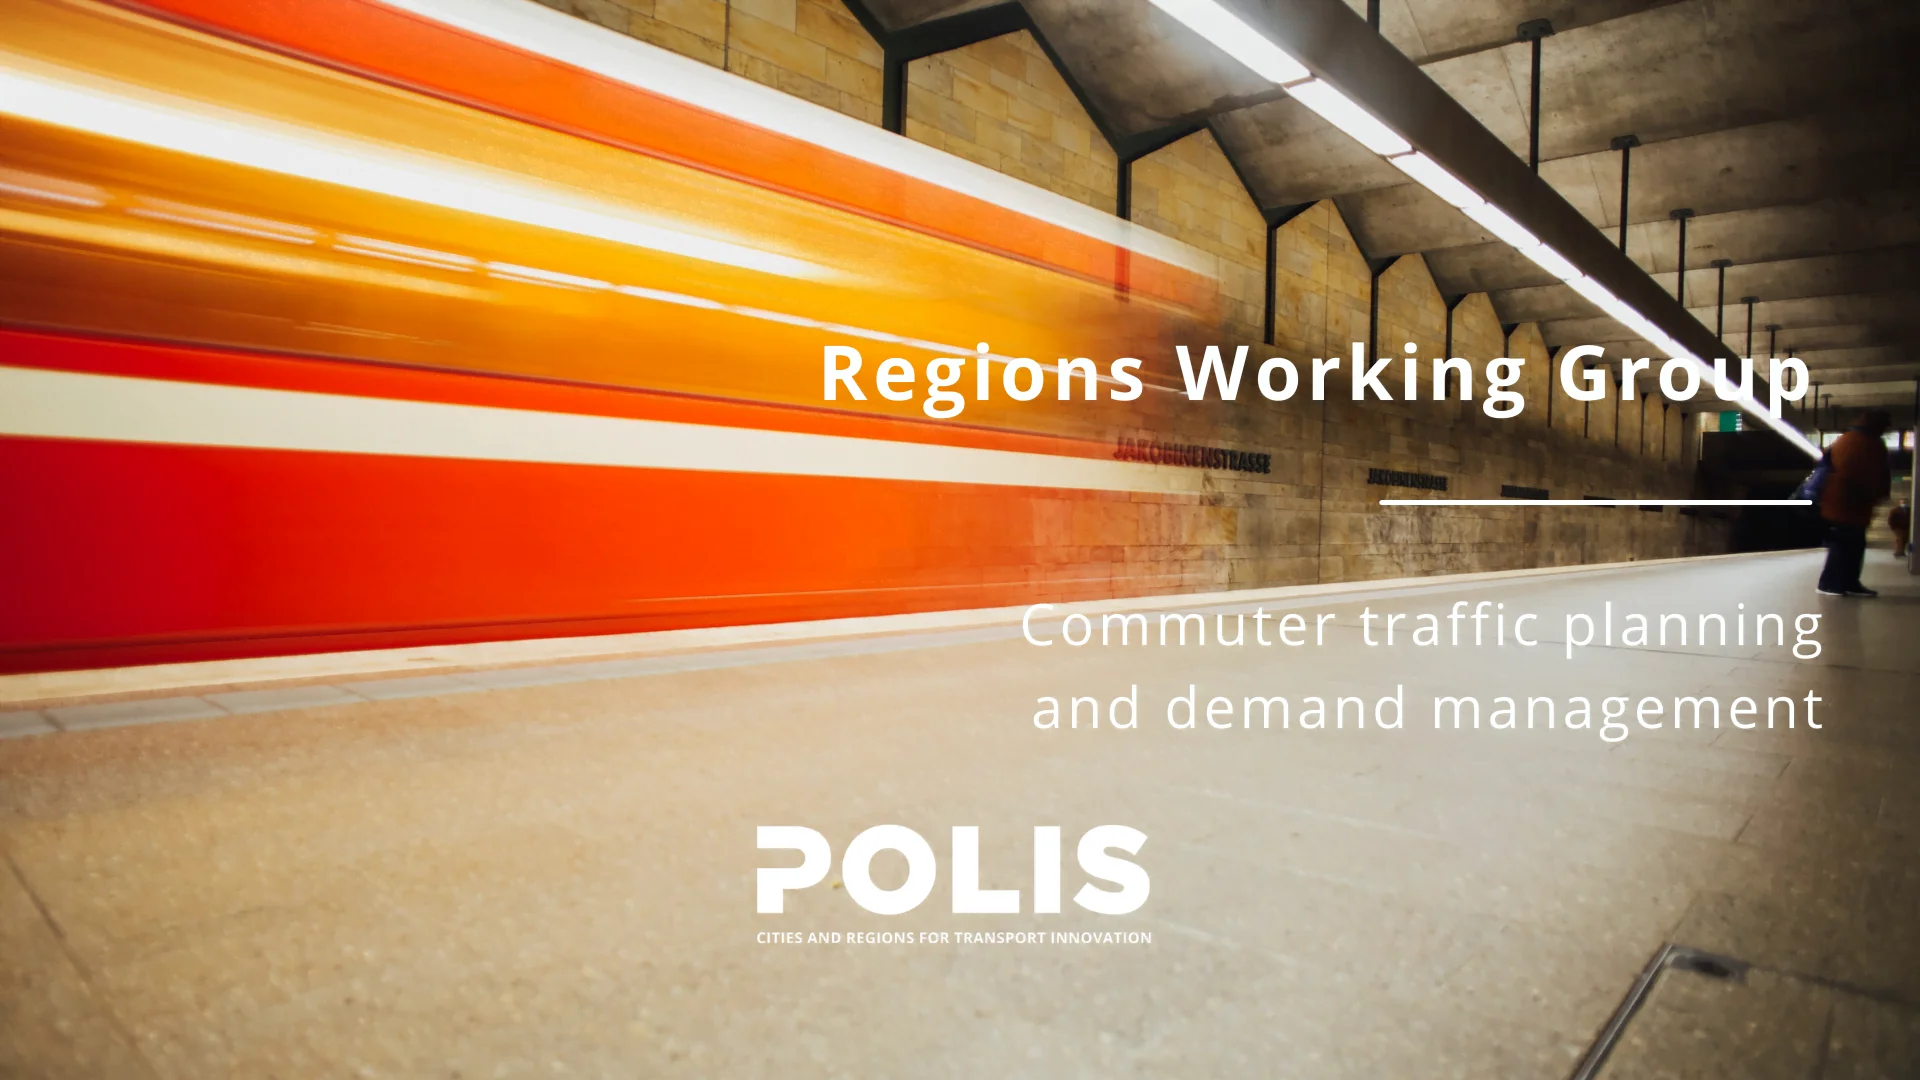 Regions Working Group: Commuter traffic planning and demand management